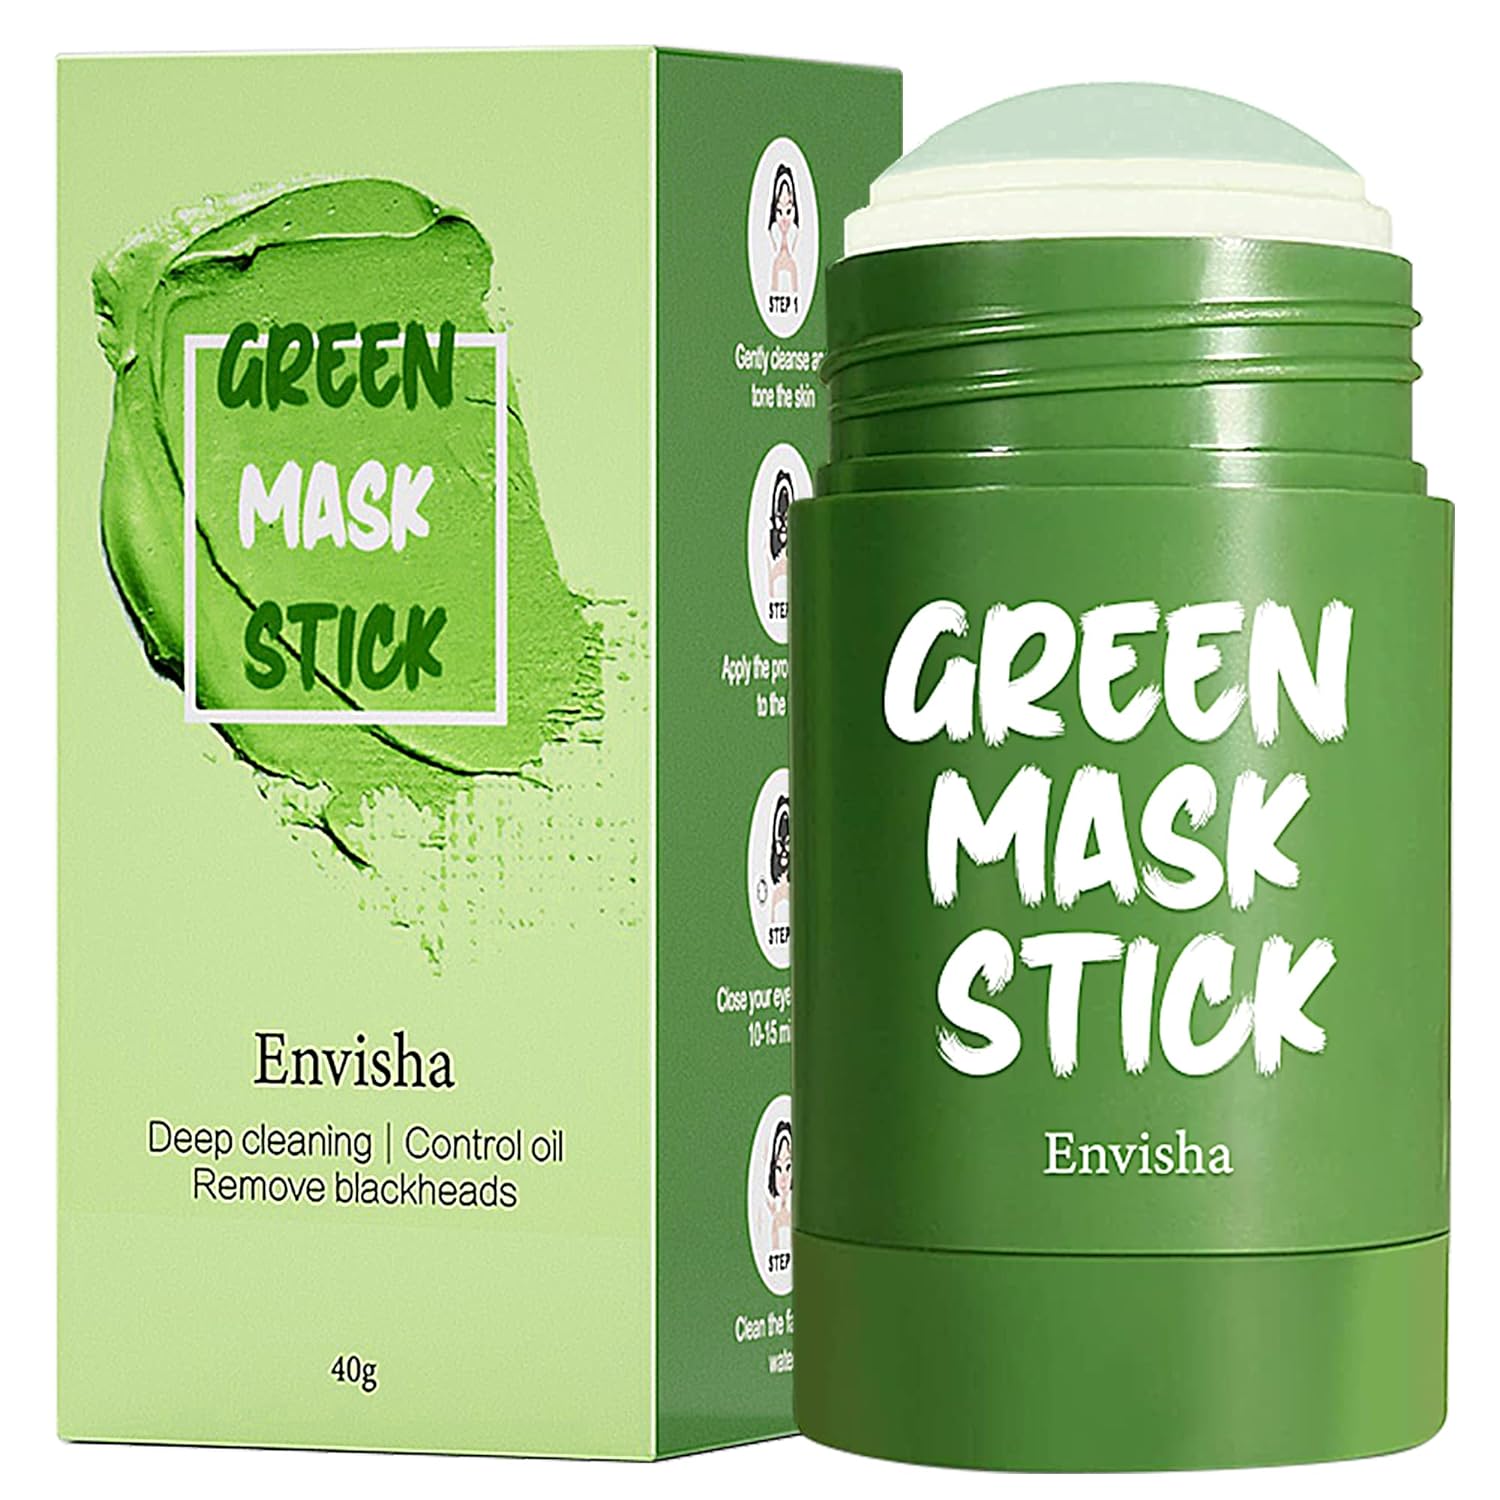 Green Tea Cleansing Mask Pen, Green Mask Pen, Blackhead Remover with Green Tea Extract, Deep Pore Cleansing, Moisturizing, Oil Control, Clay Face Mask